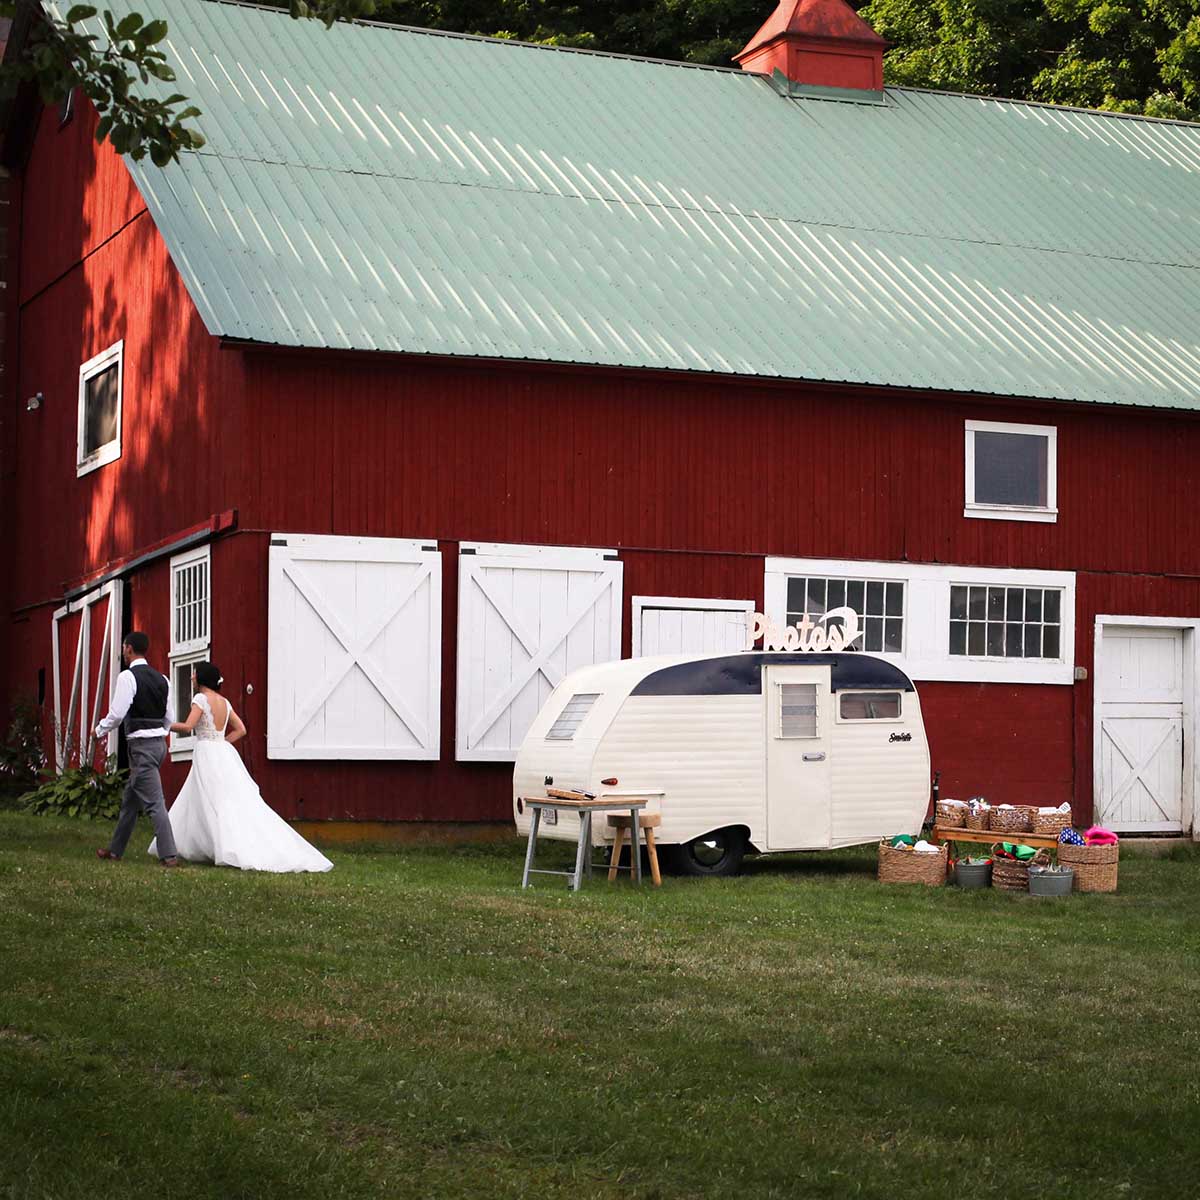 Camper photo booth at a wedding in the berkshires. Holiday Brook Farm Dalton, Massachusetts